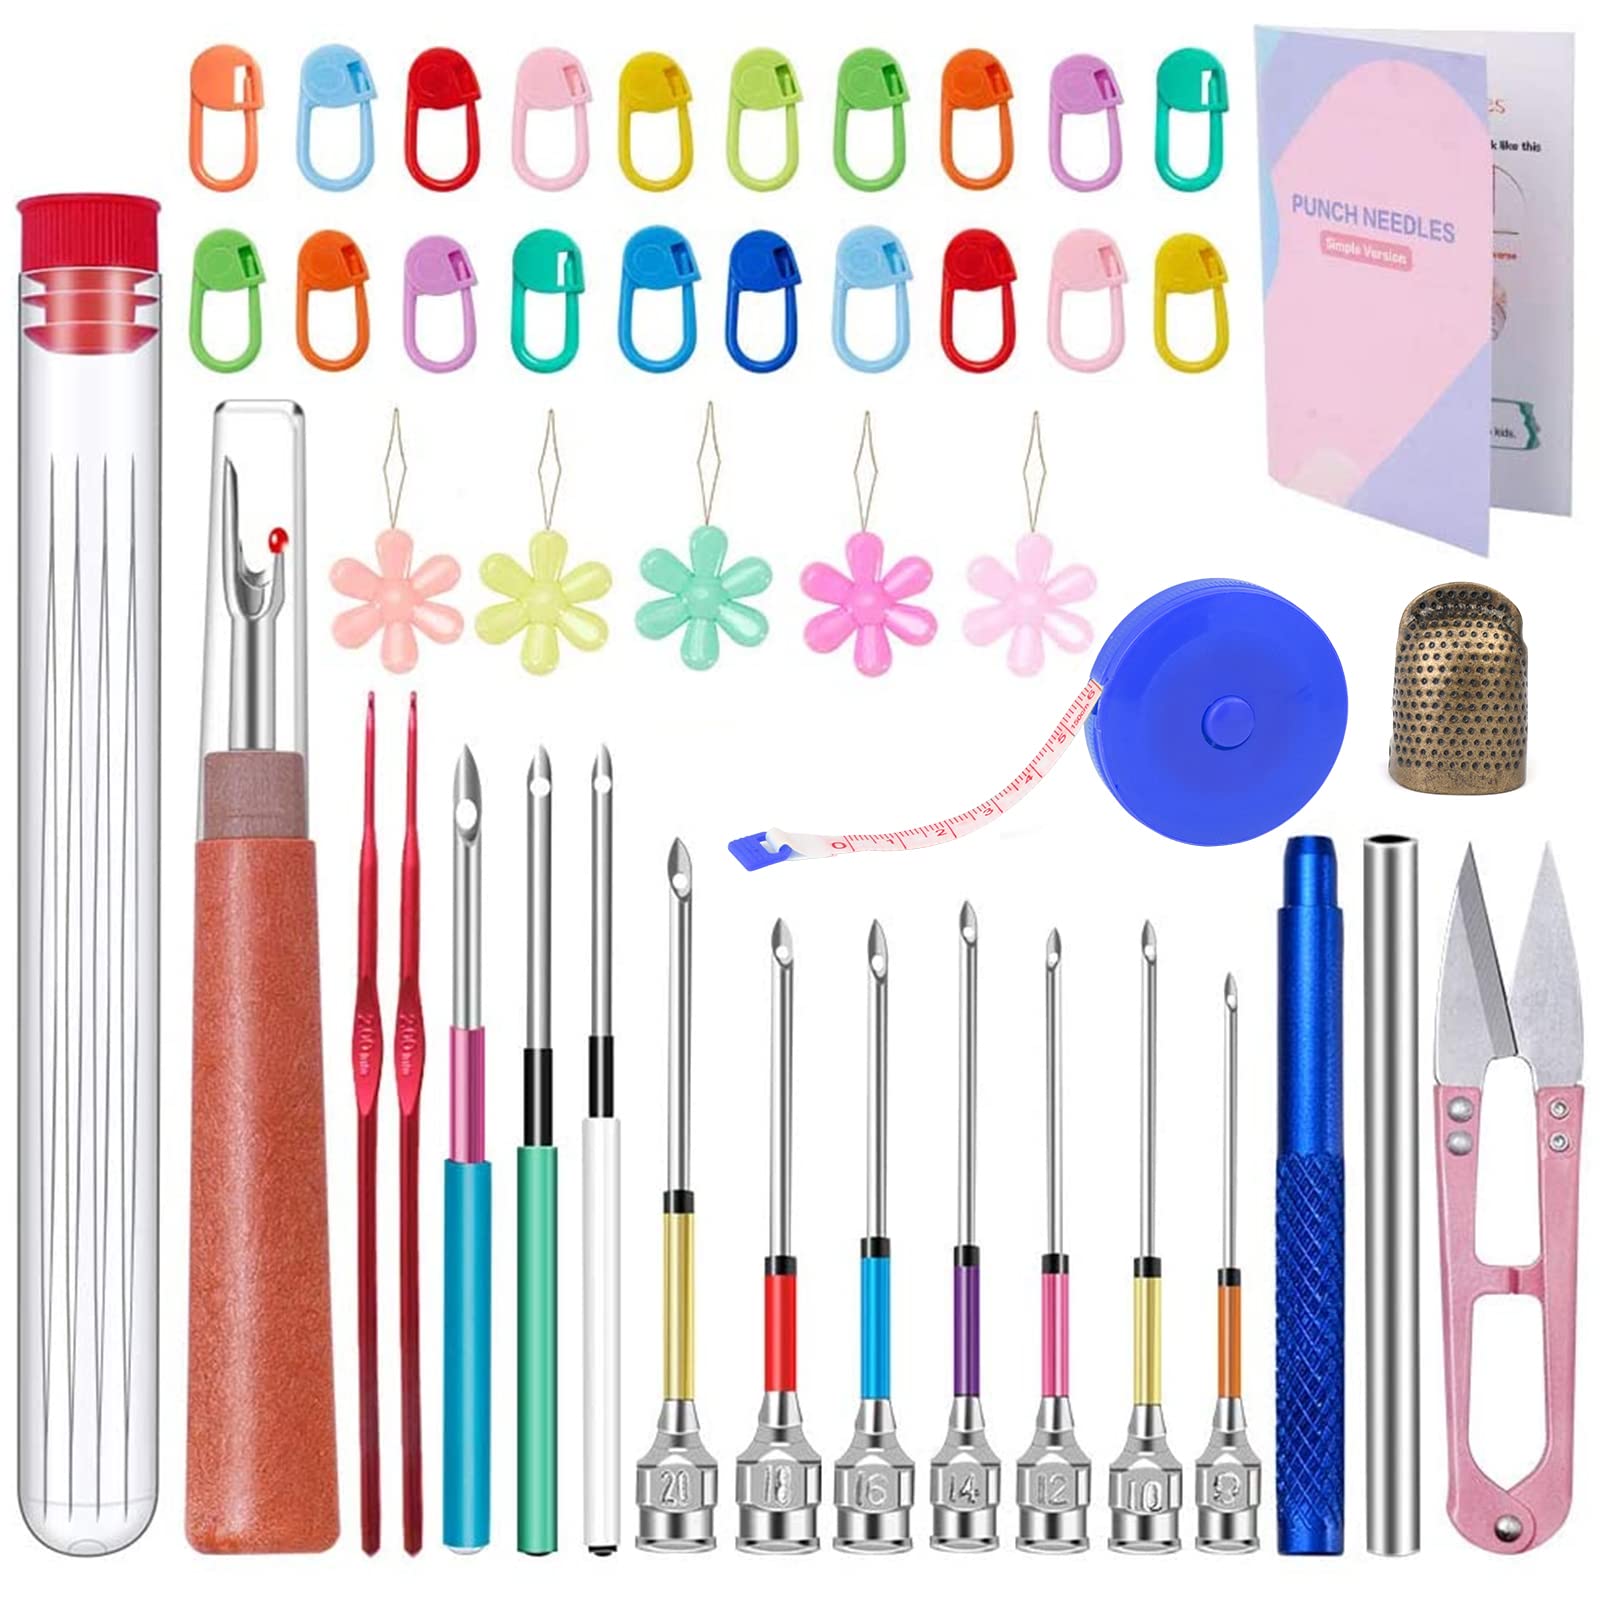 Punch Needle 43 Pieces Punch Needle Tool and Instructions - Punch Needle  Embroidery Kit with Embroidery Tools Seam Ripper Threader and Thimble Needle  Punch Kits for Beginners